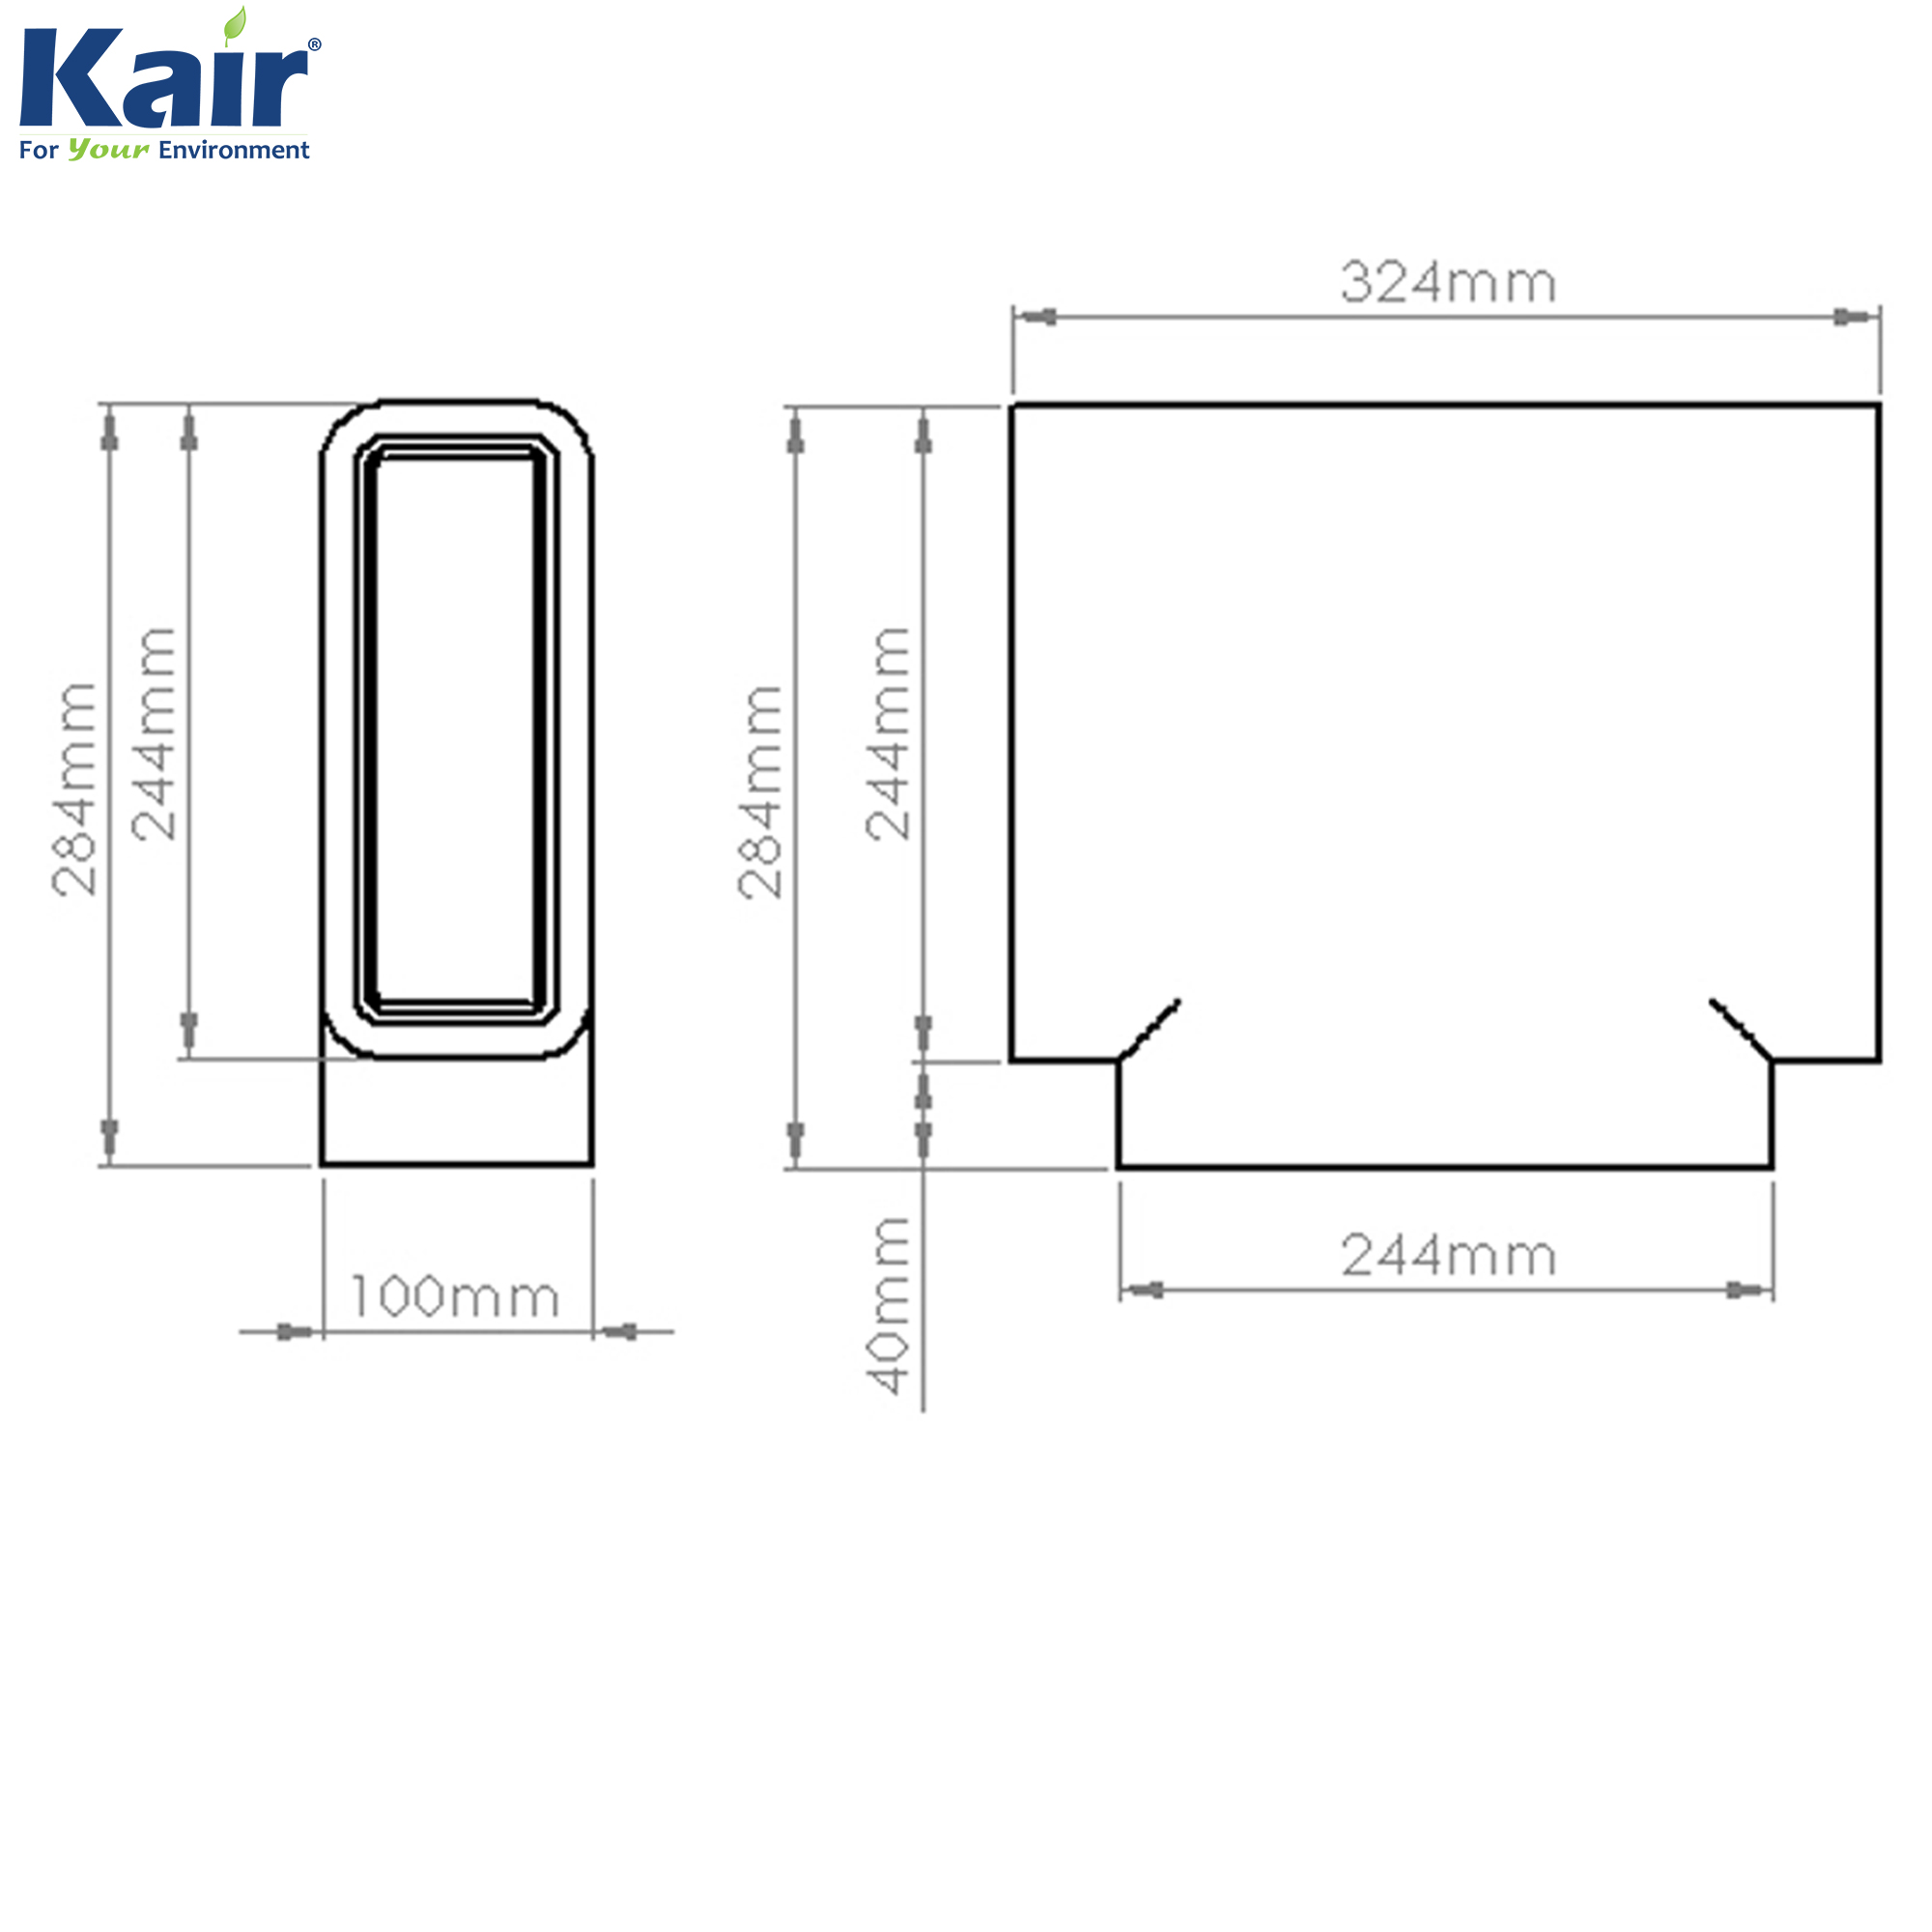 Kair Self-Seal Thermal Ducting 204X60mm T-Piece Complete With Female Click And Lock Fittings